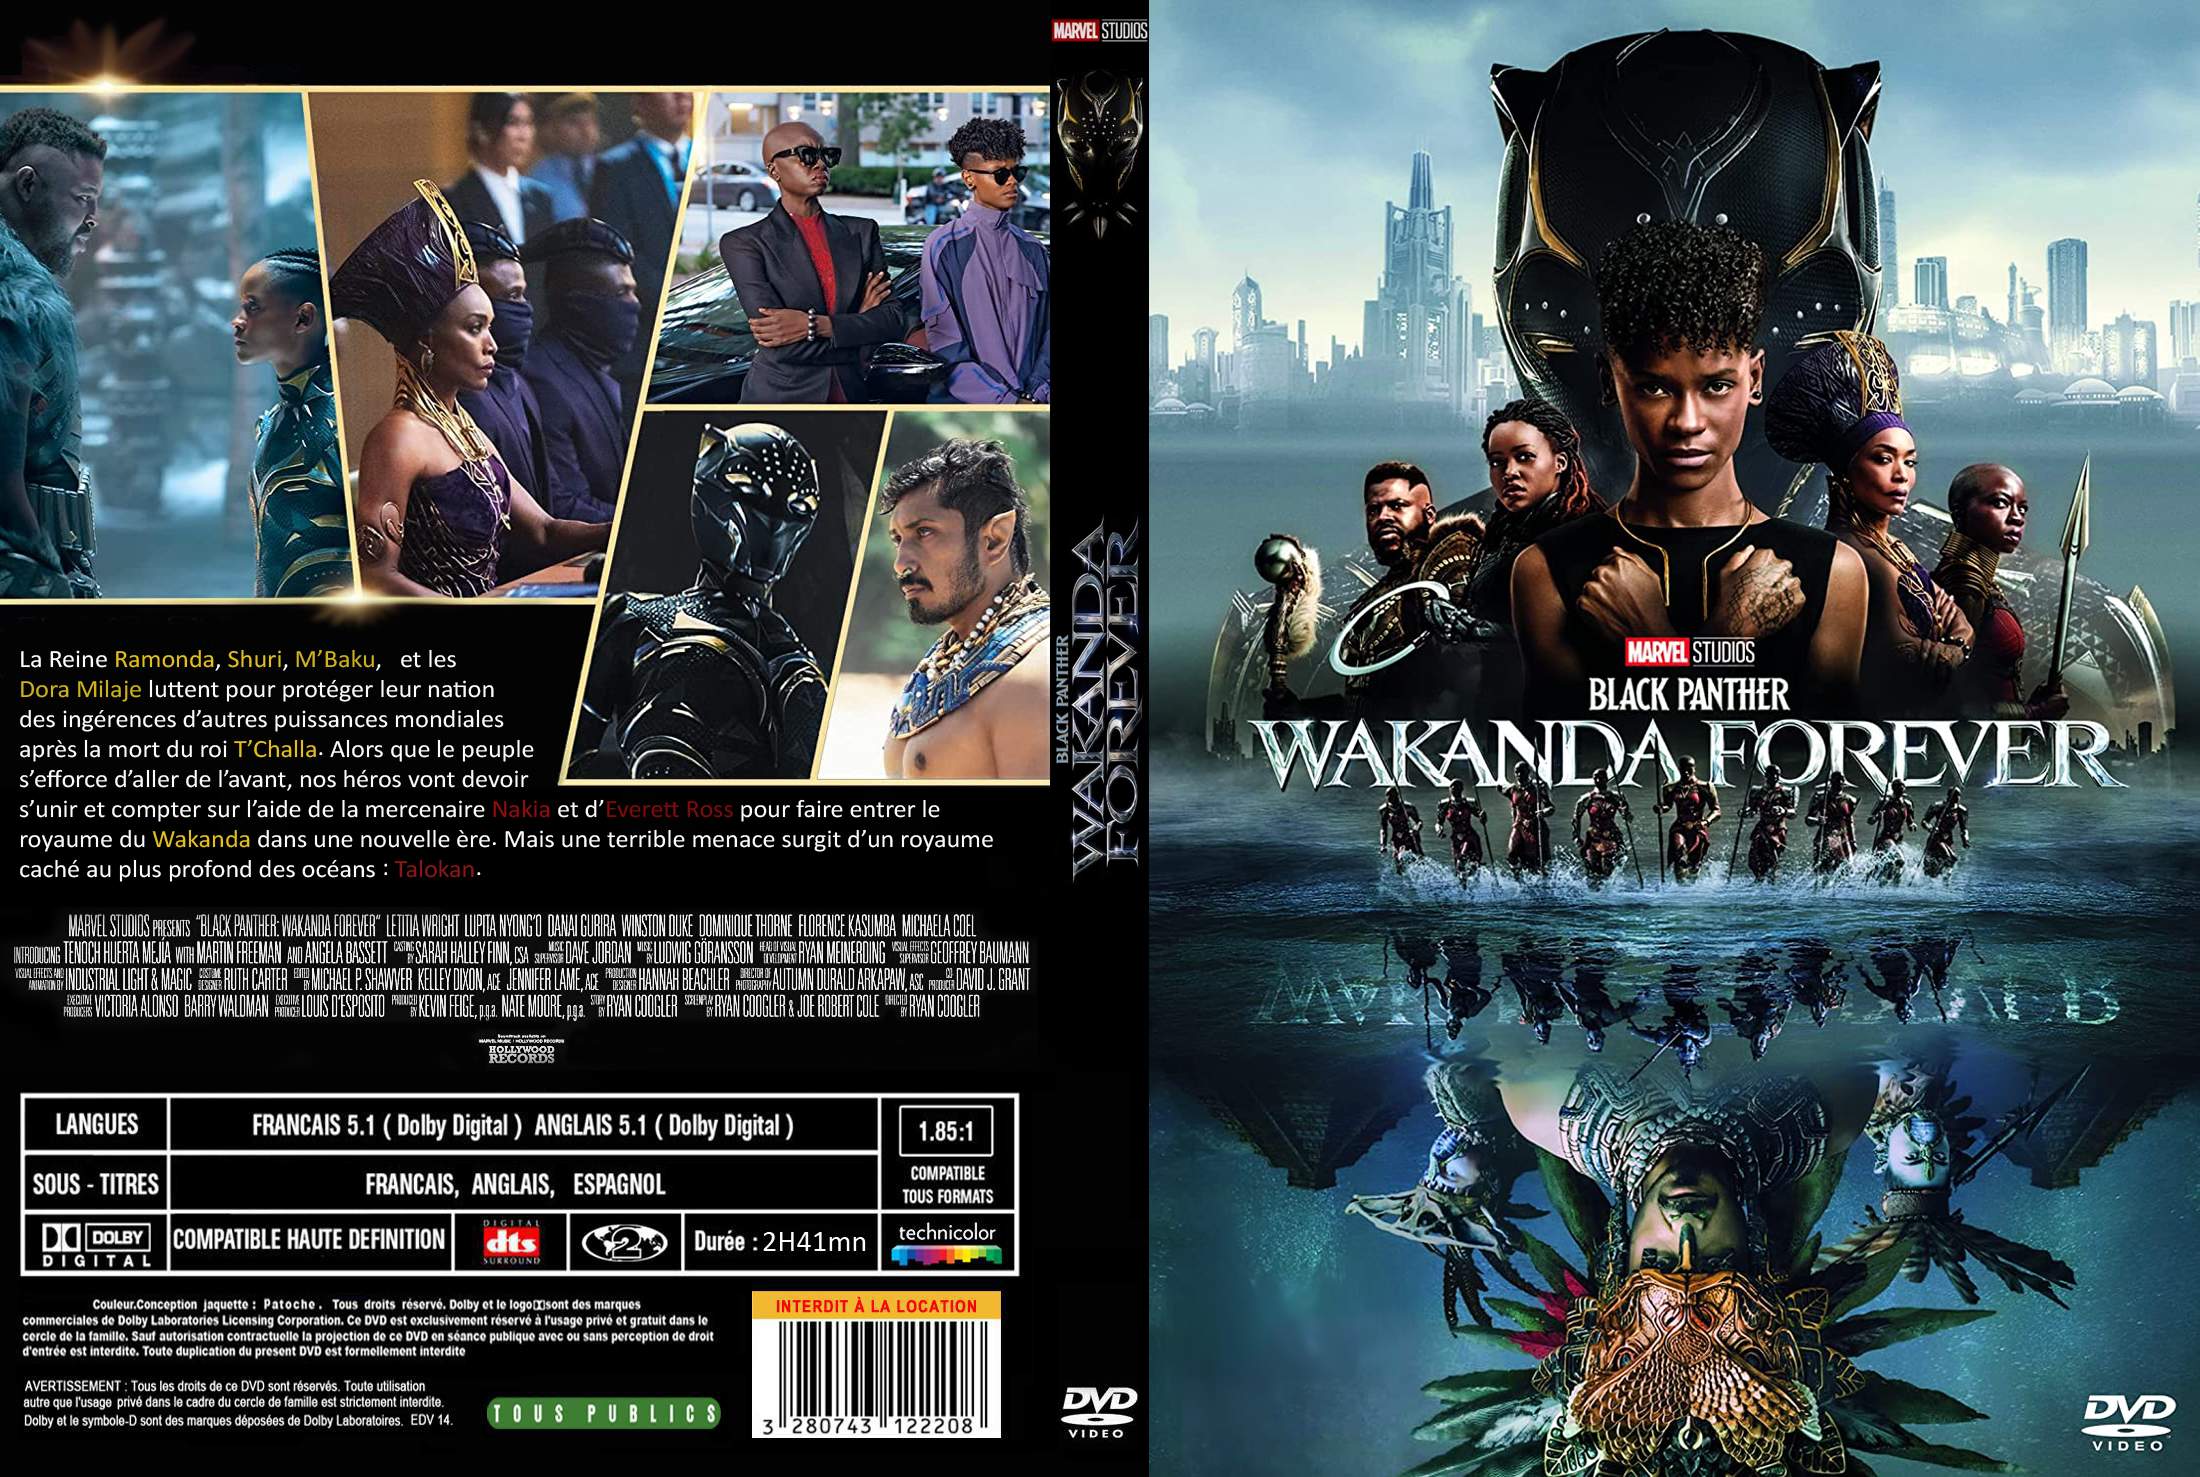 Jaquette DVD Black Panther Wakanda Forever custom